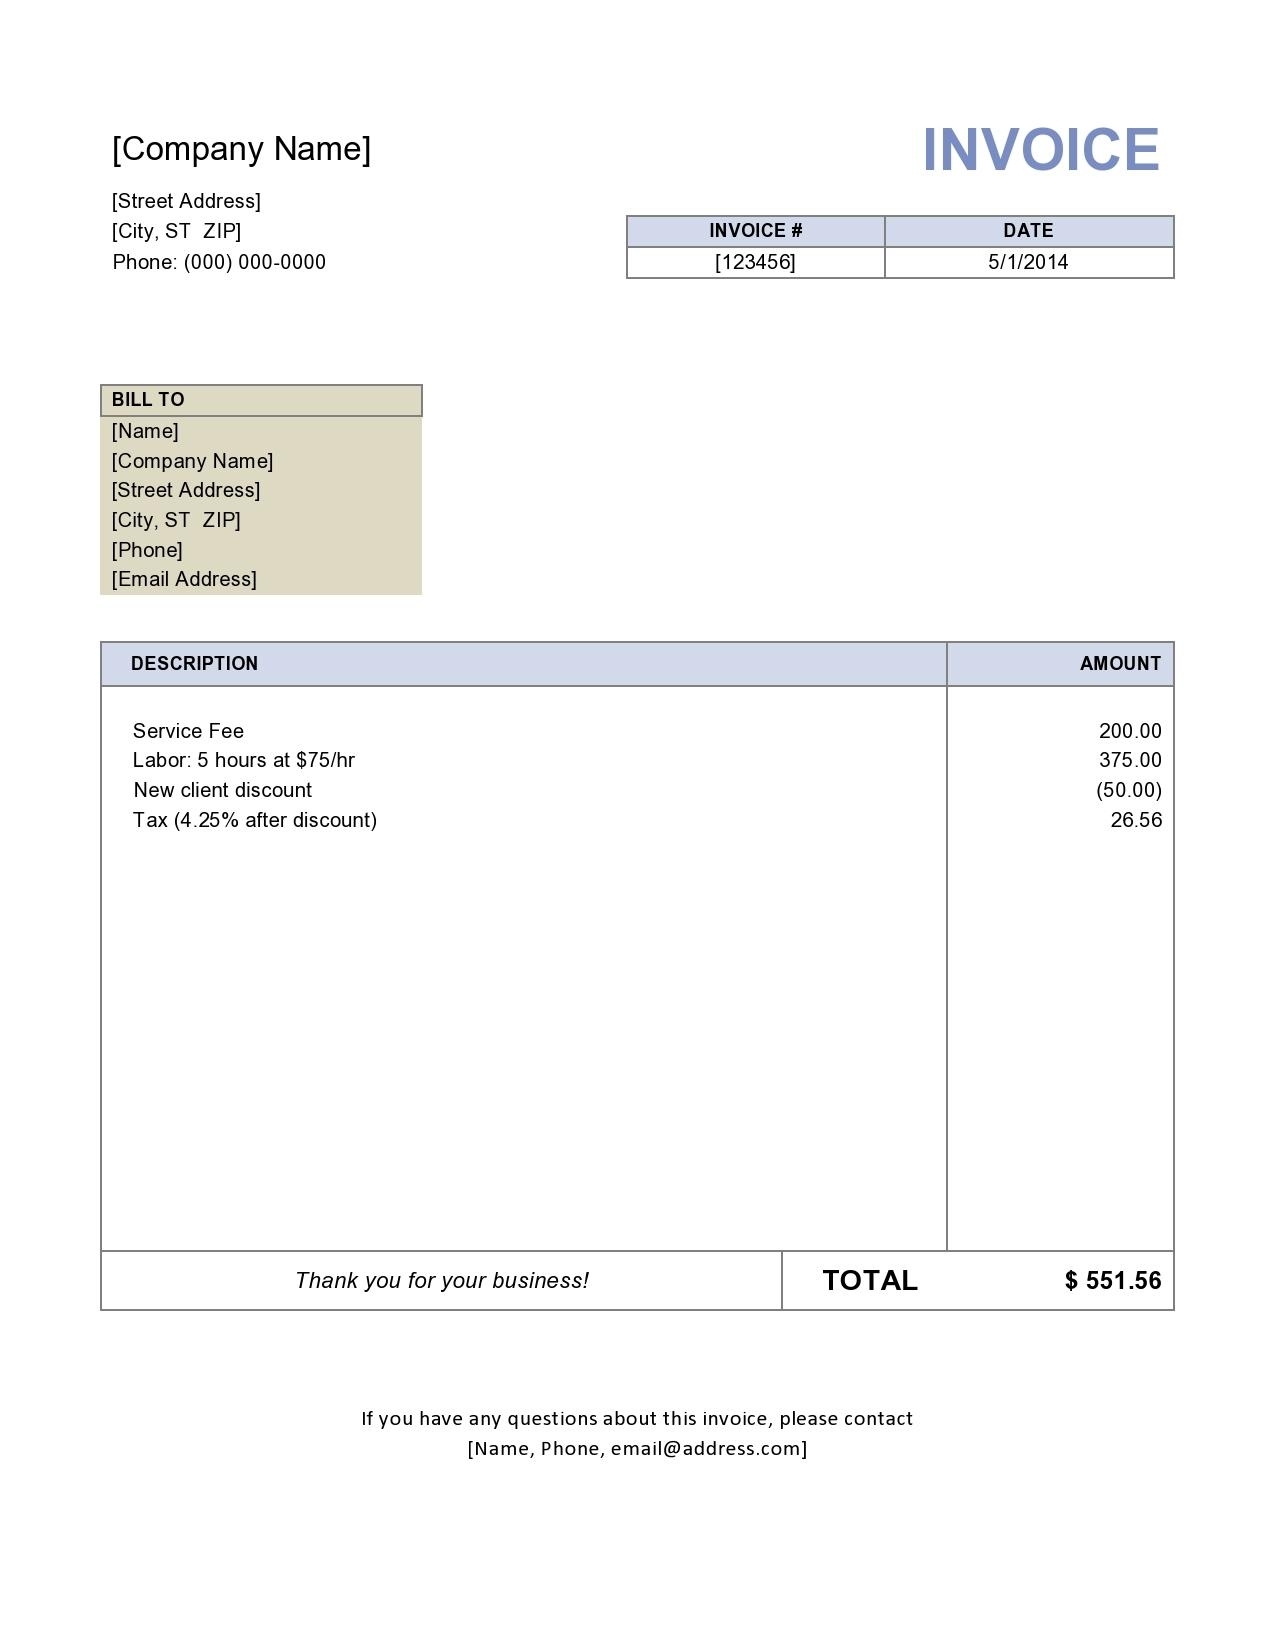 free invoice template in word word invoice templates invoice template free 2016 1275 X 1650